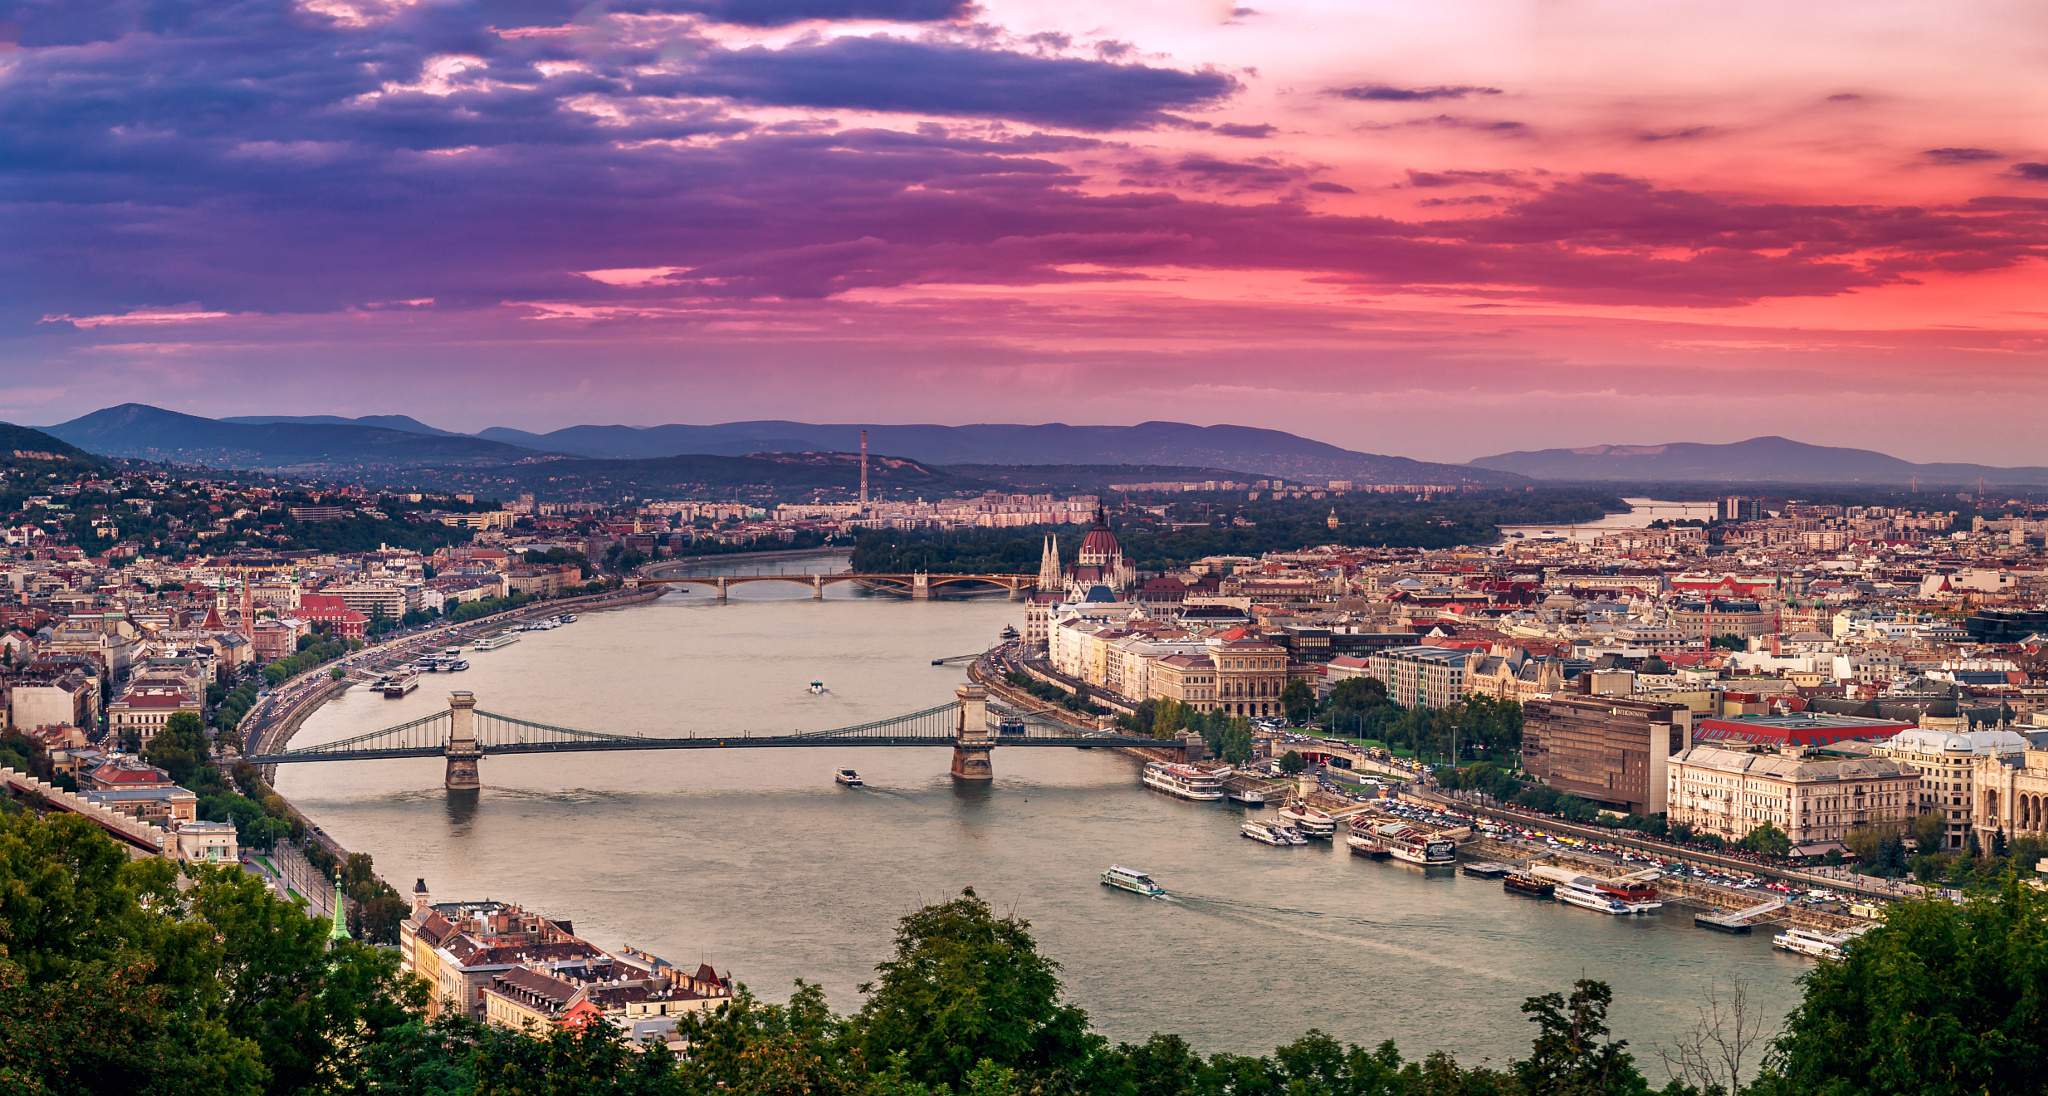 Sunset in Budapest by Cosmin Anghel